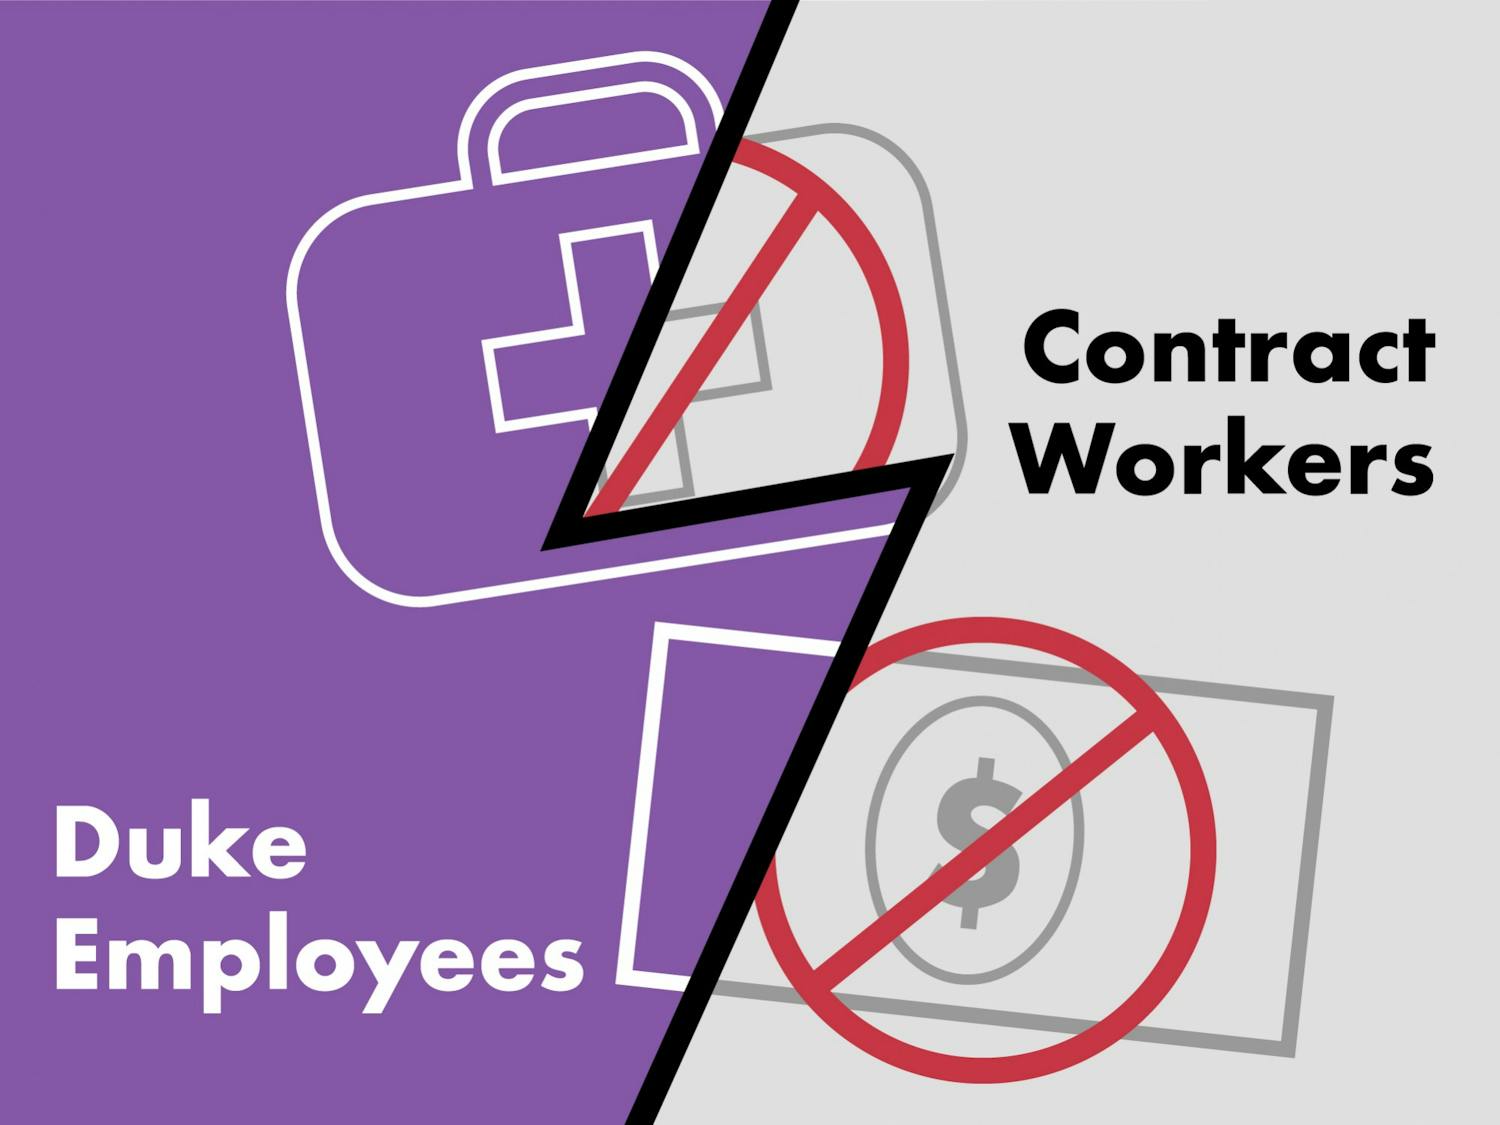 Contract workers